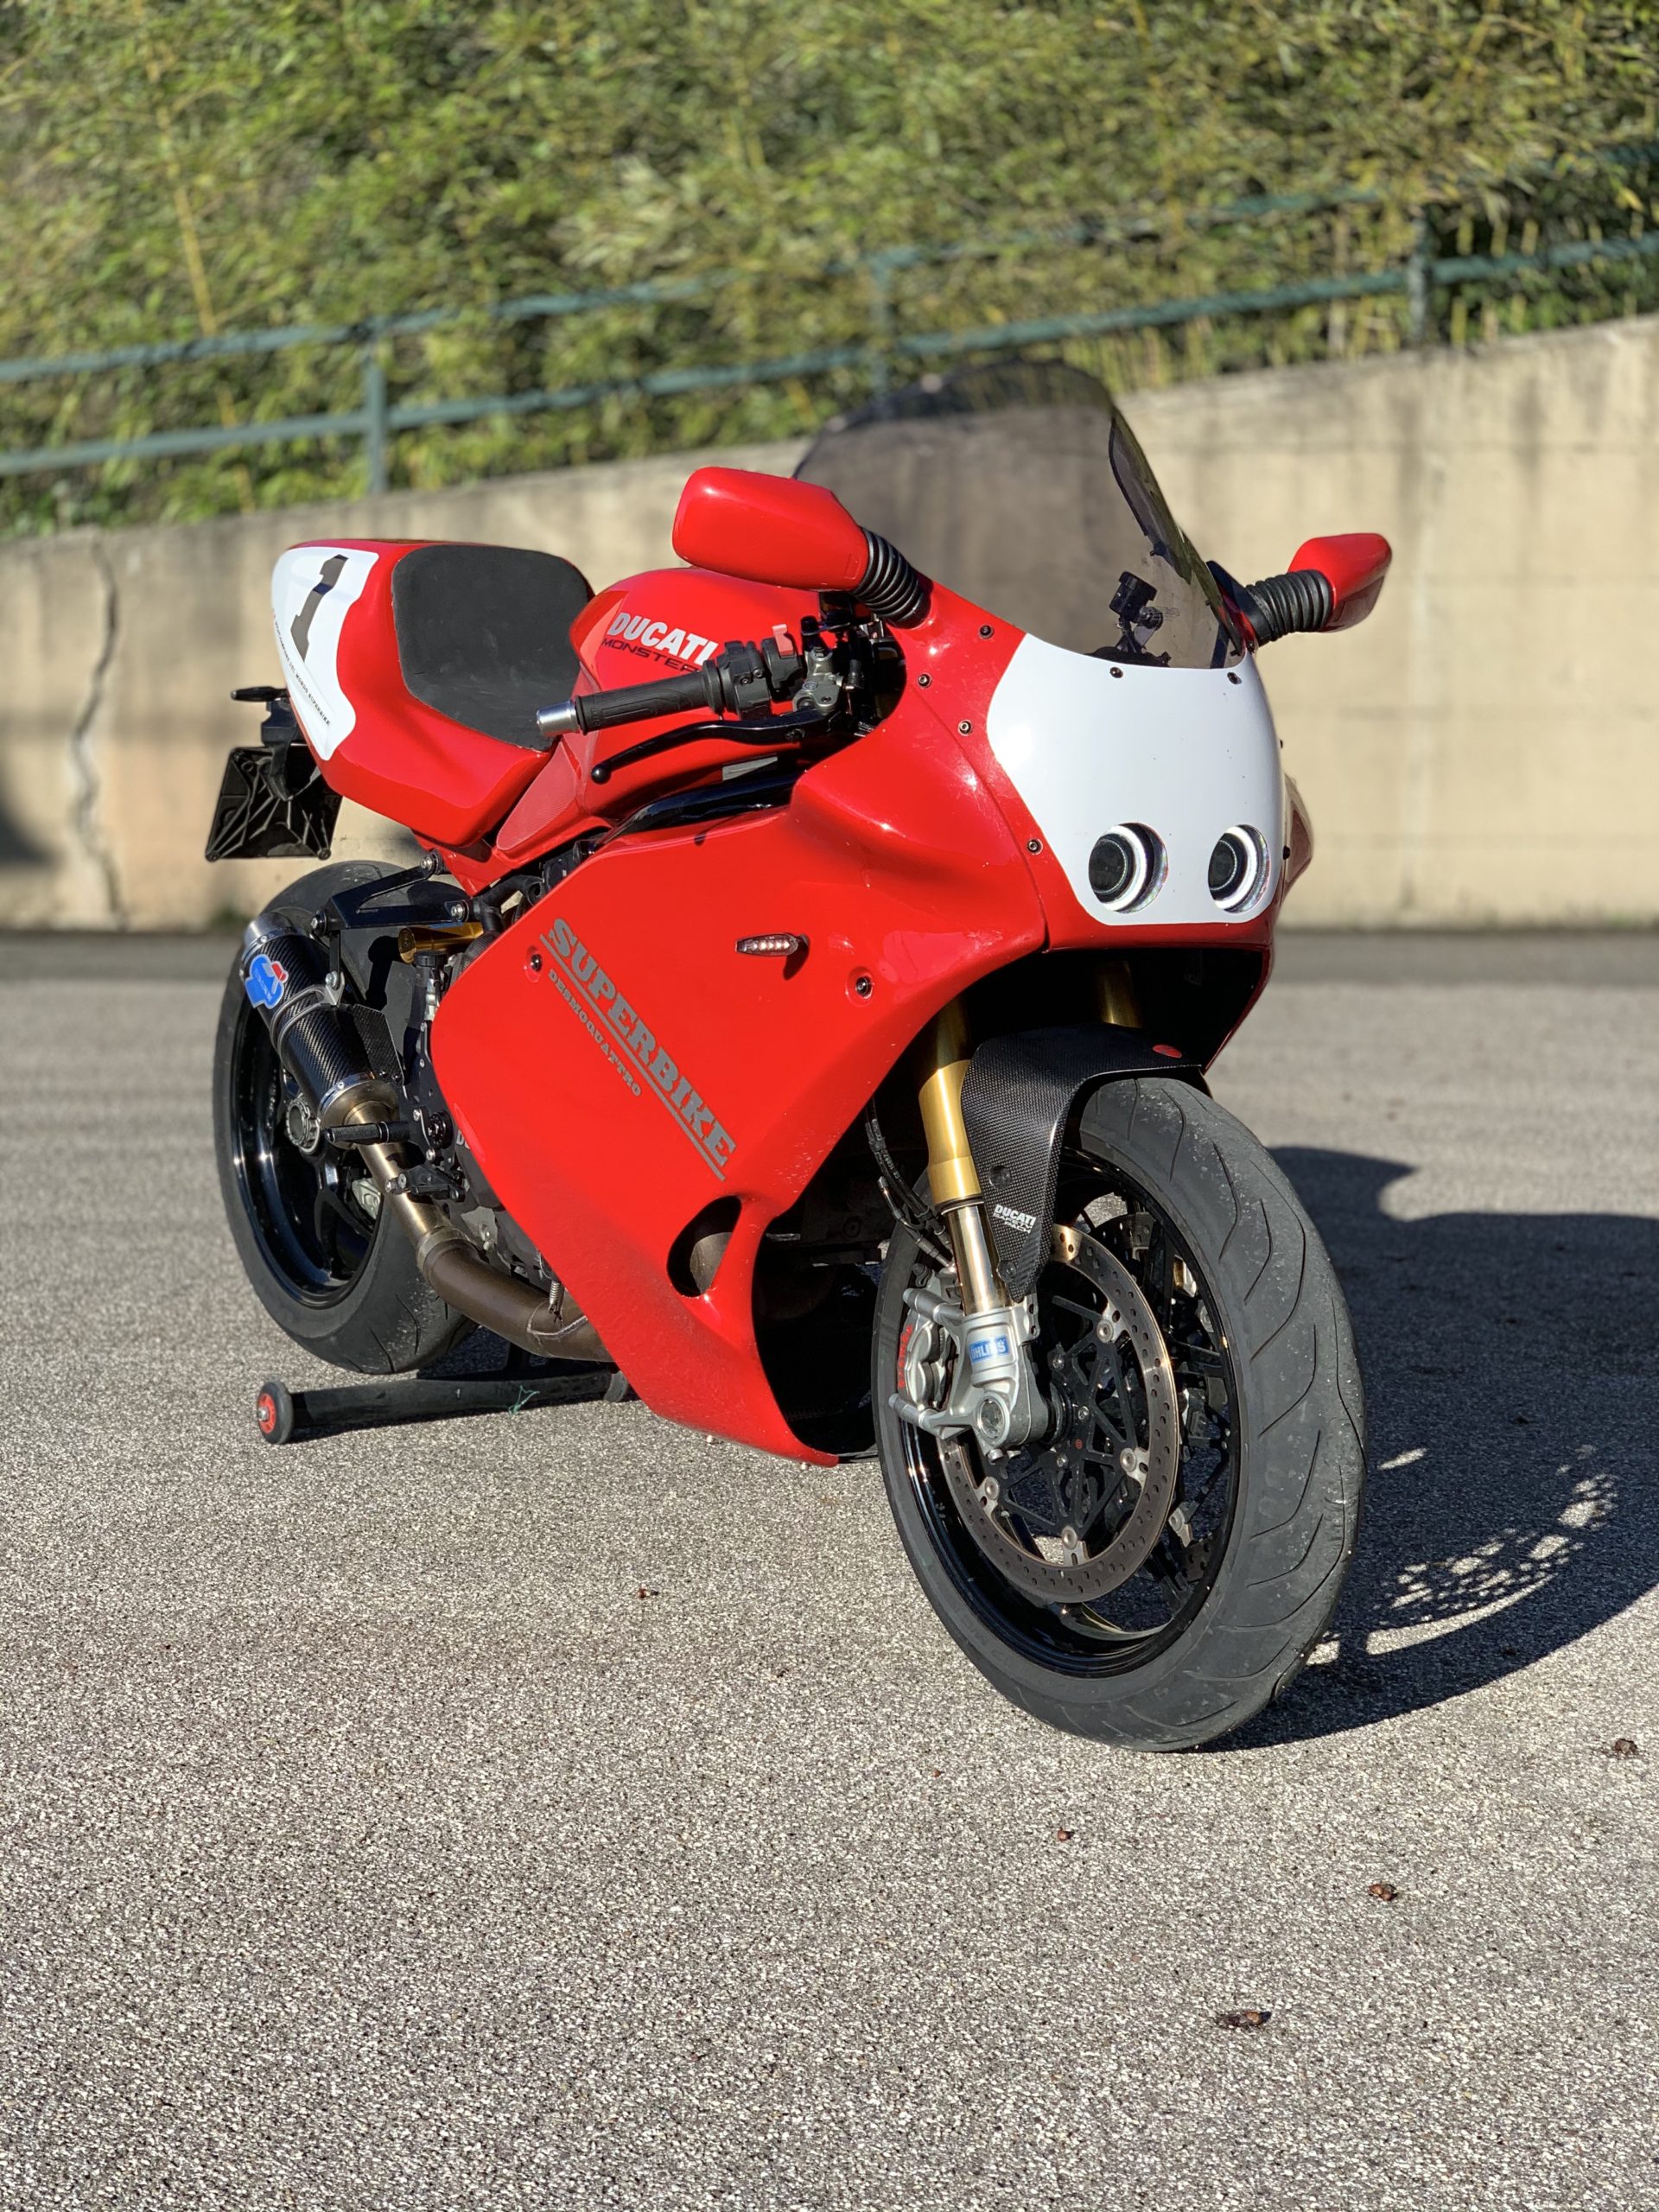 Custom Ducati - modern and vintage combined